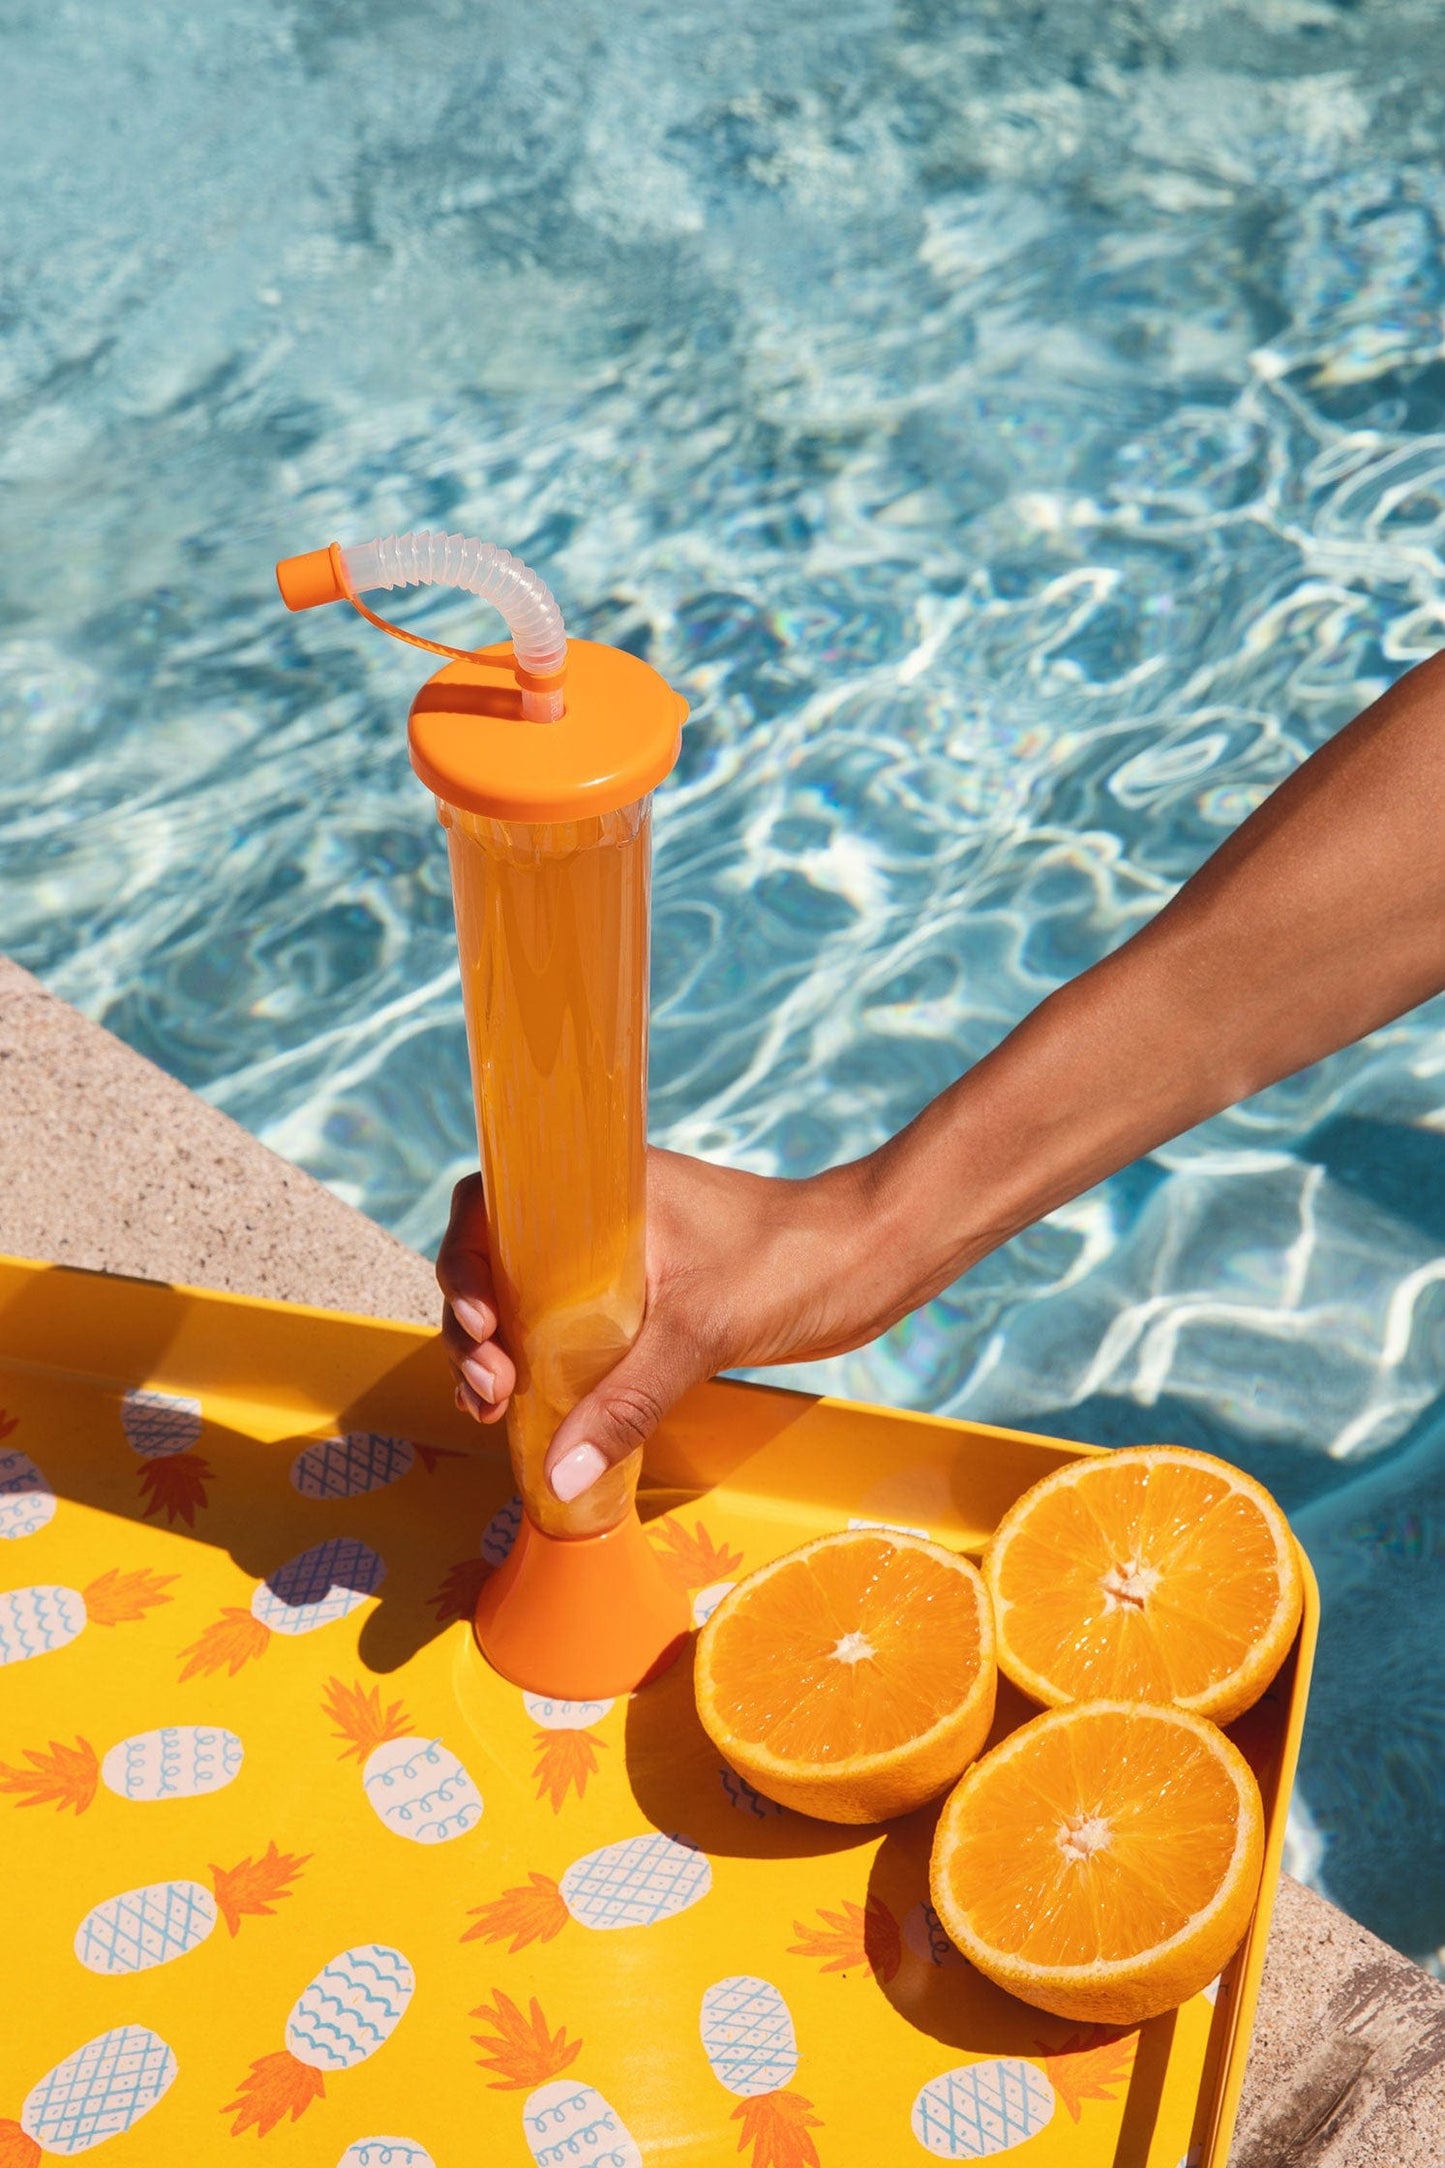 Sweet World USA Yard Cups (54 or 108 Cups) Yard Cups with ORANGE Lids and Straws - 14oz - for Margaritas and Frozen Drinks cups with lids and straws